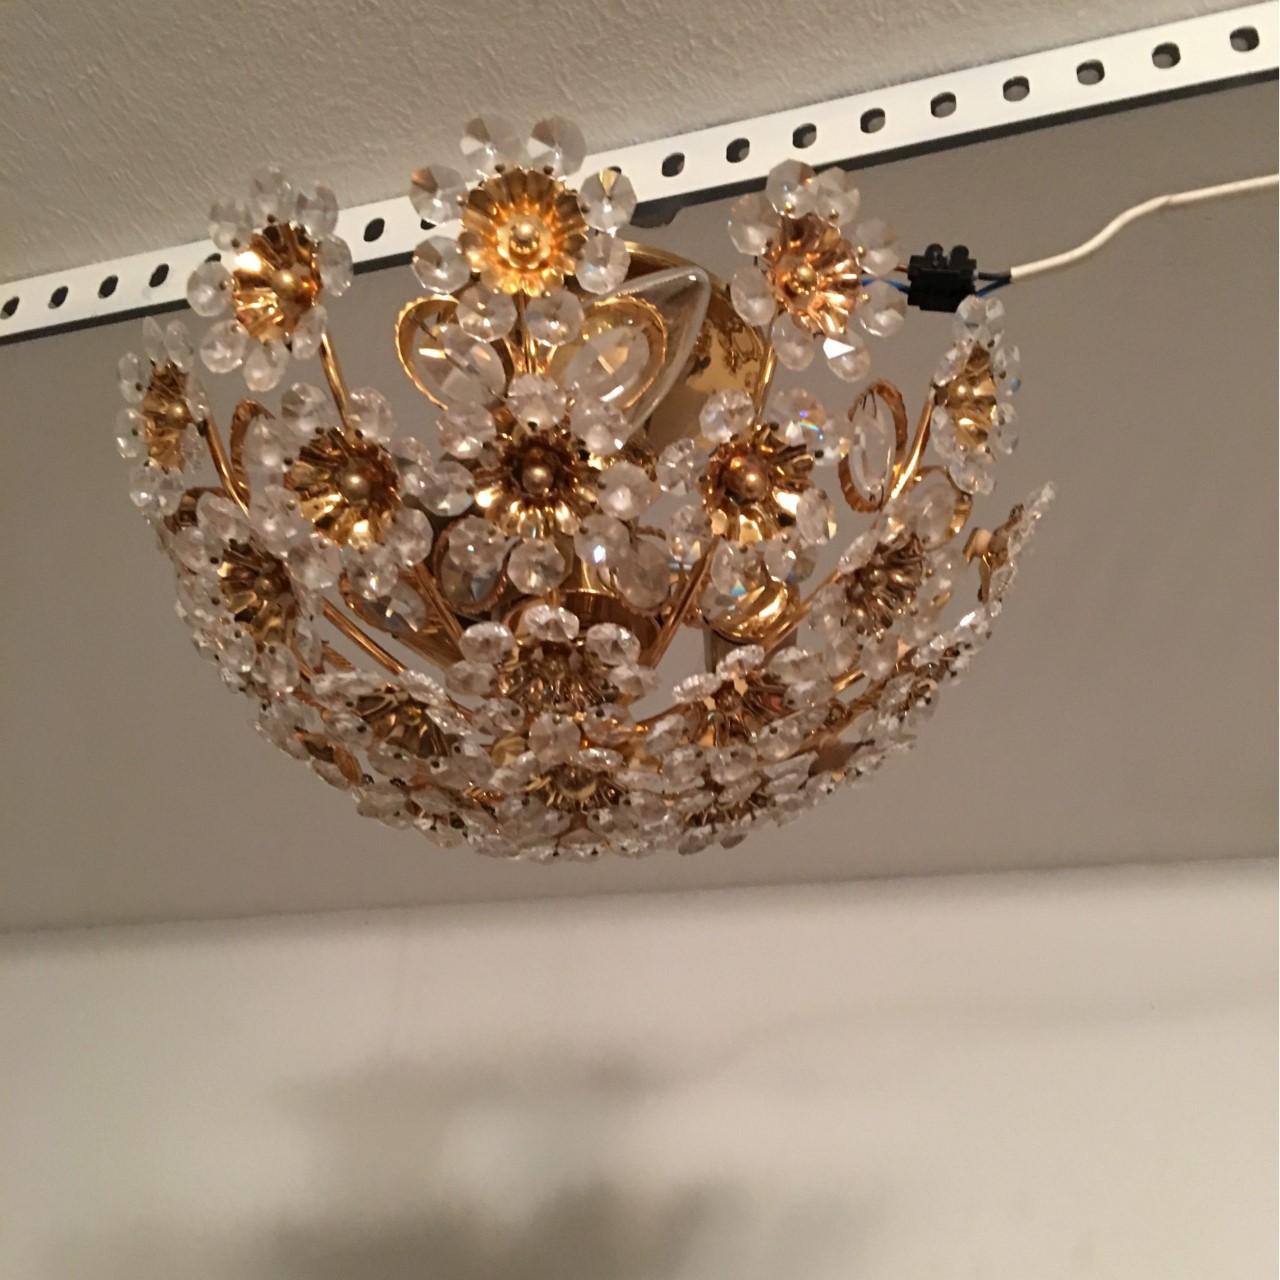 Chandelier made of Gilded Brass Crystal Flowers from Palwa. Manufactured in the late 1960s or very early 1970s.
The fixture requires three European E 14 candelabra bulbs, each bulb up to 40 watts. In working condition. Equipped with original 20th